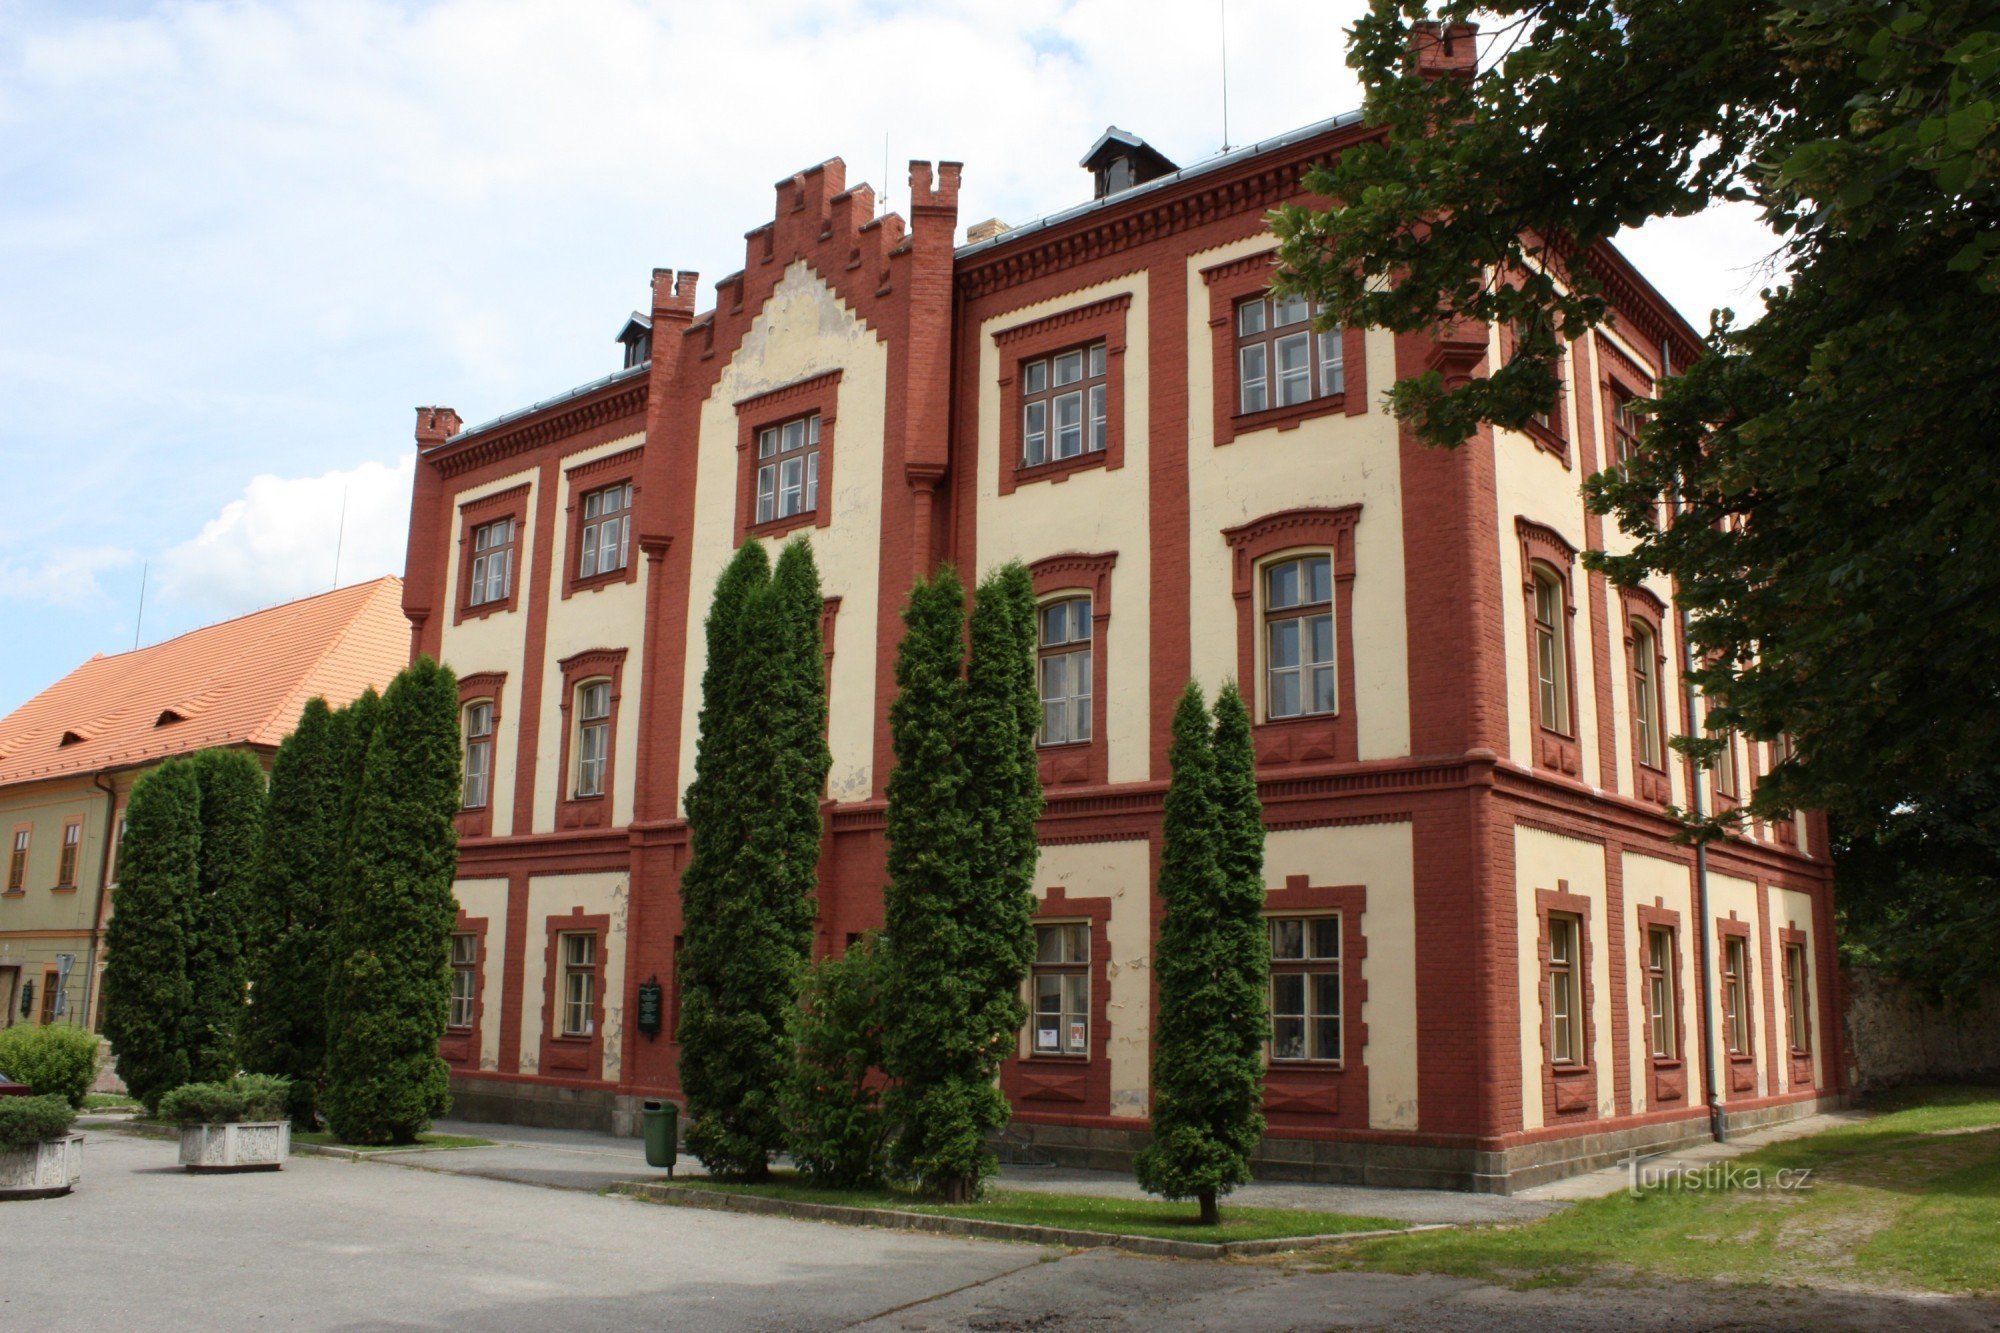 Neo-Gothic building of the old school in Netolice